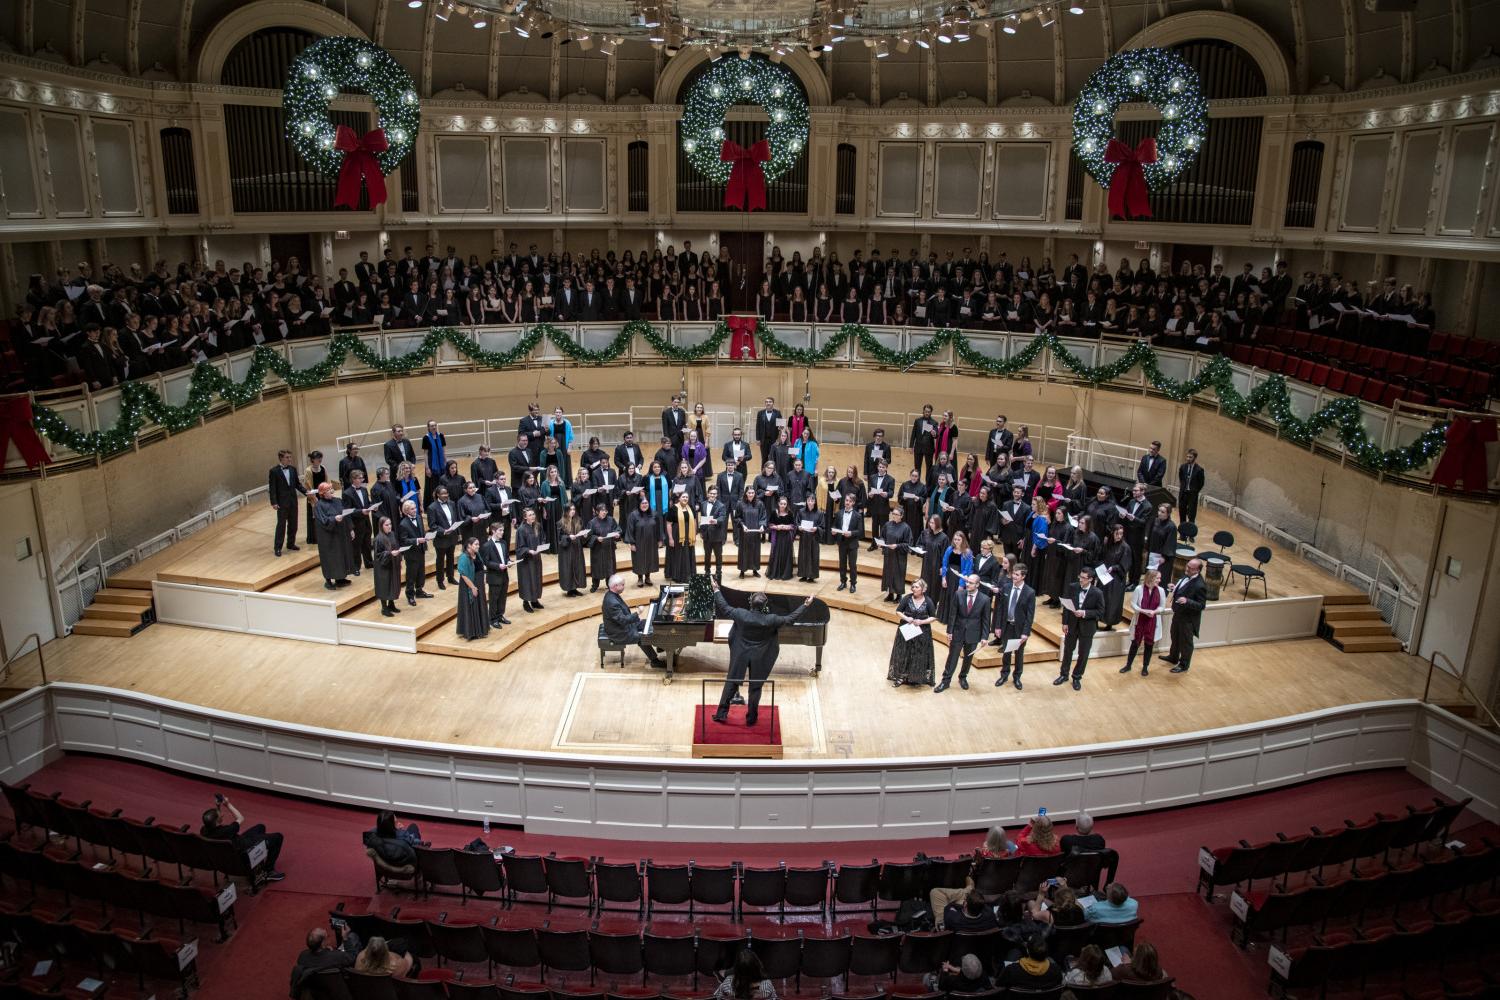 The <a href='http://5fhp.biaoshi365.com'>全球十大赌钱排行app</a> Choir performs in the Chicago Symphony Hall.